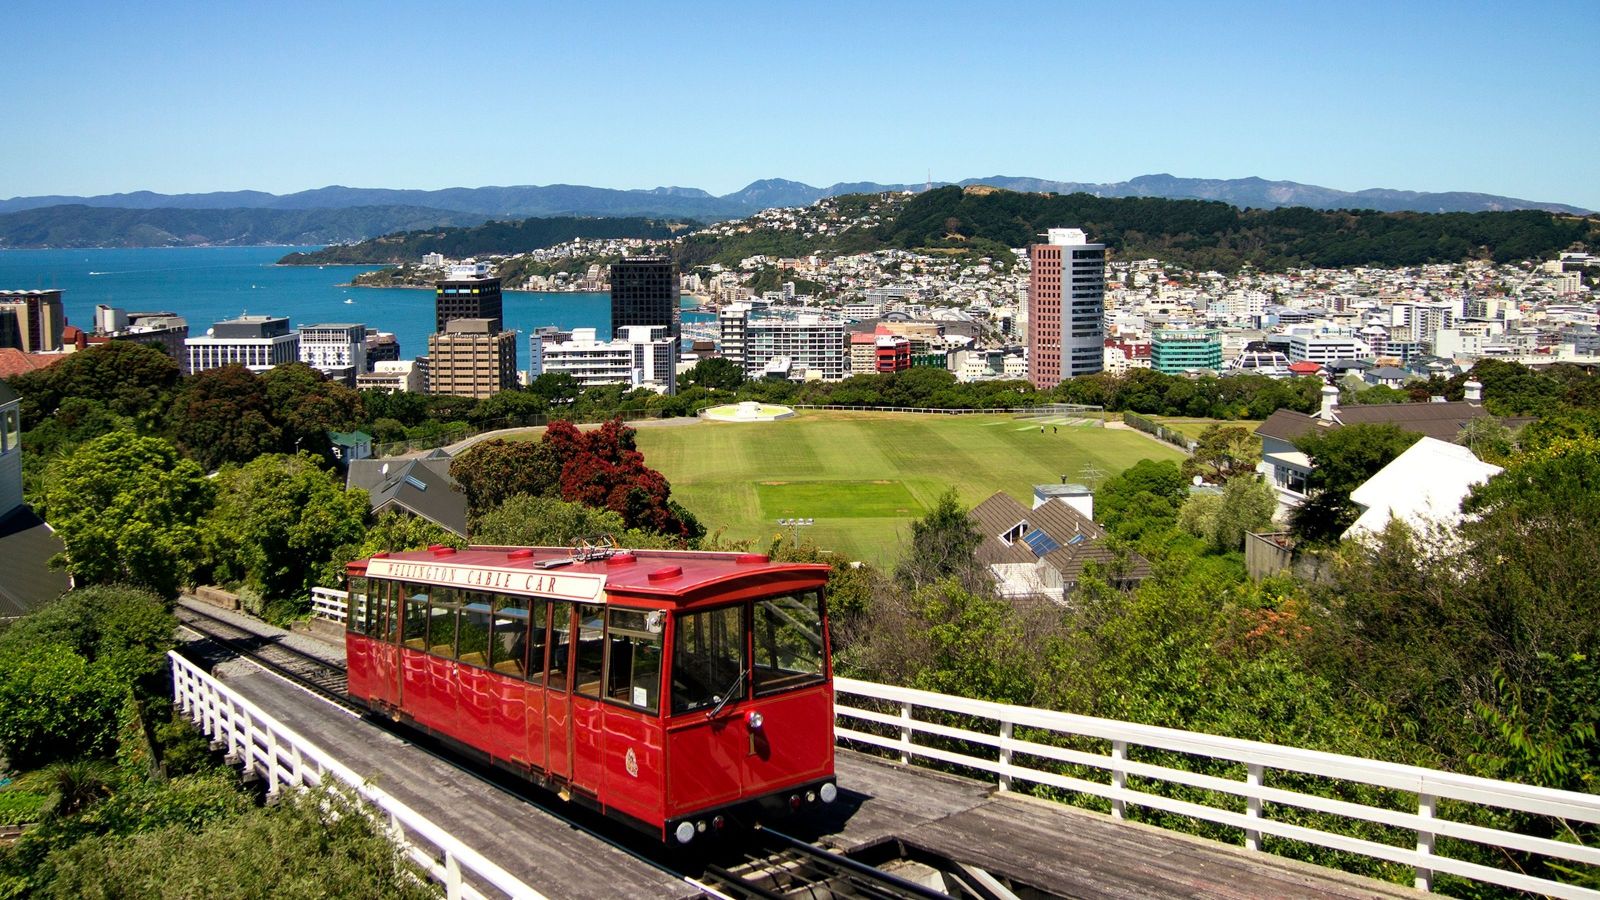 An image from the Cable Car overlooking Kelburn Campus field and Wellington City with harbour in the distance